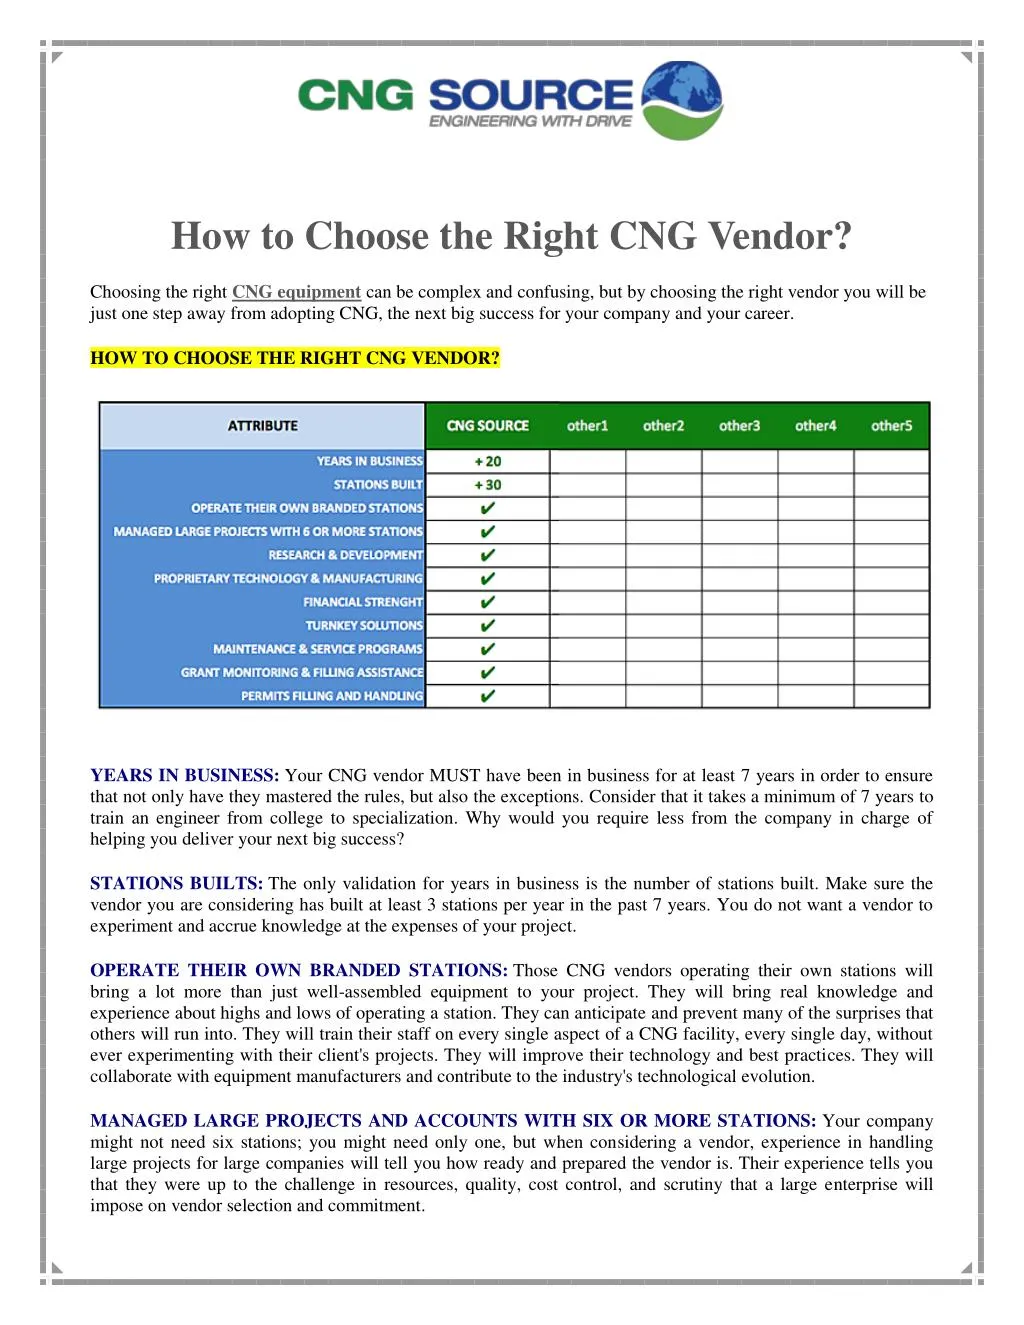 how to choose the right cng vendor